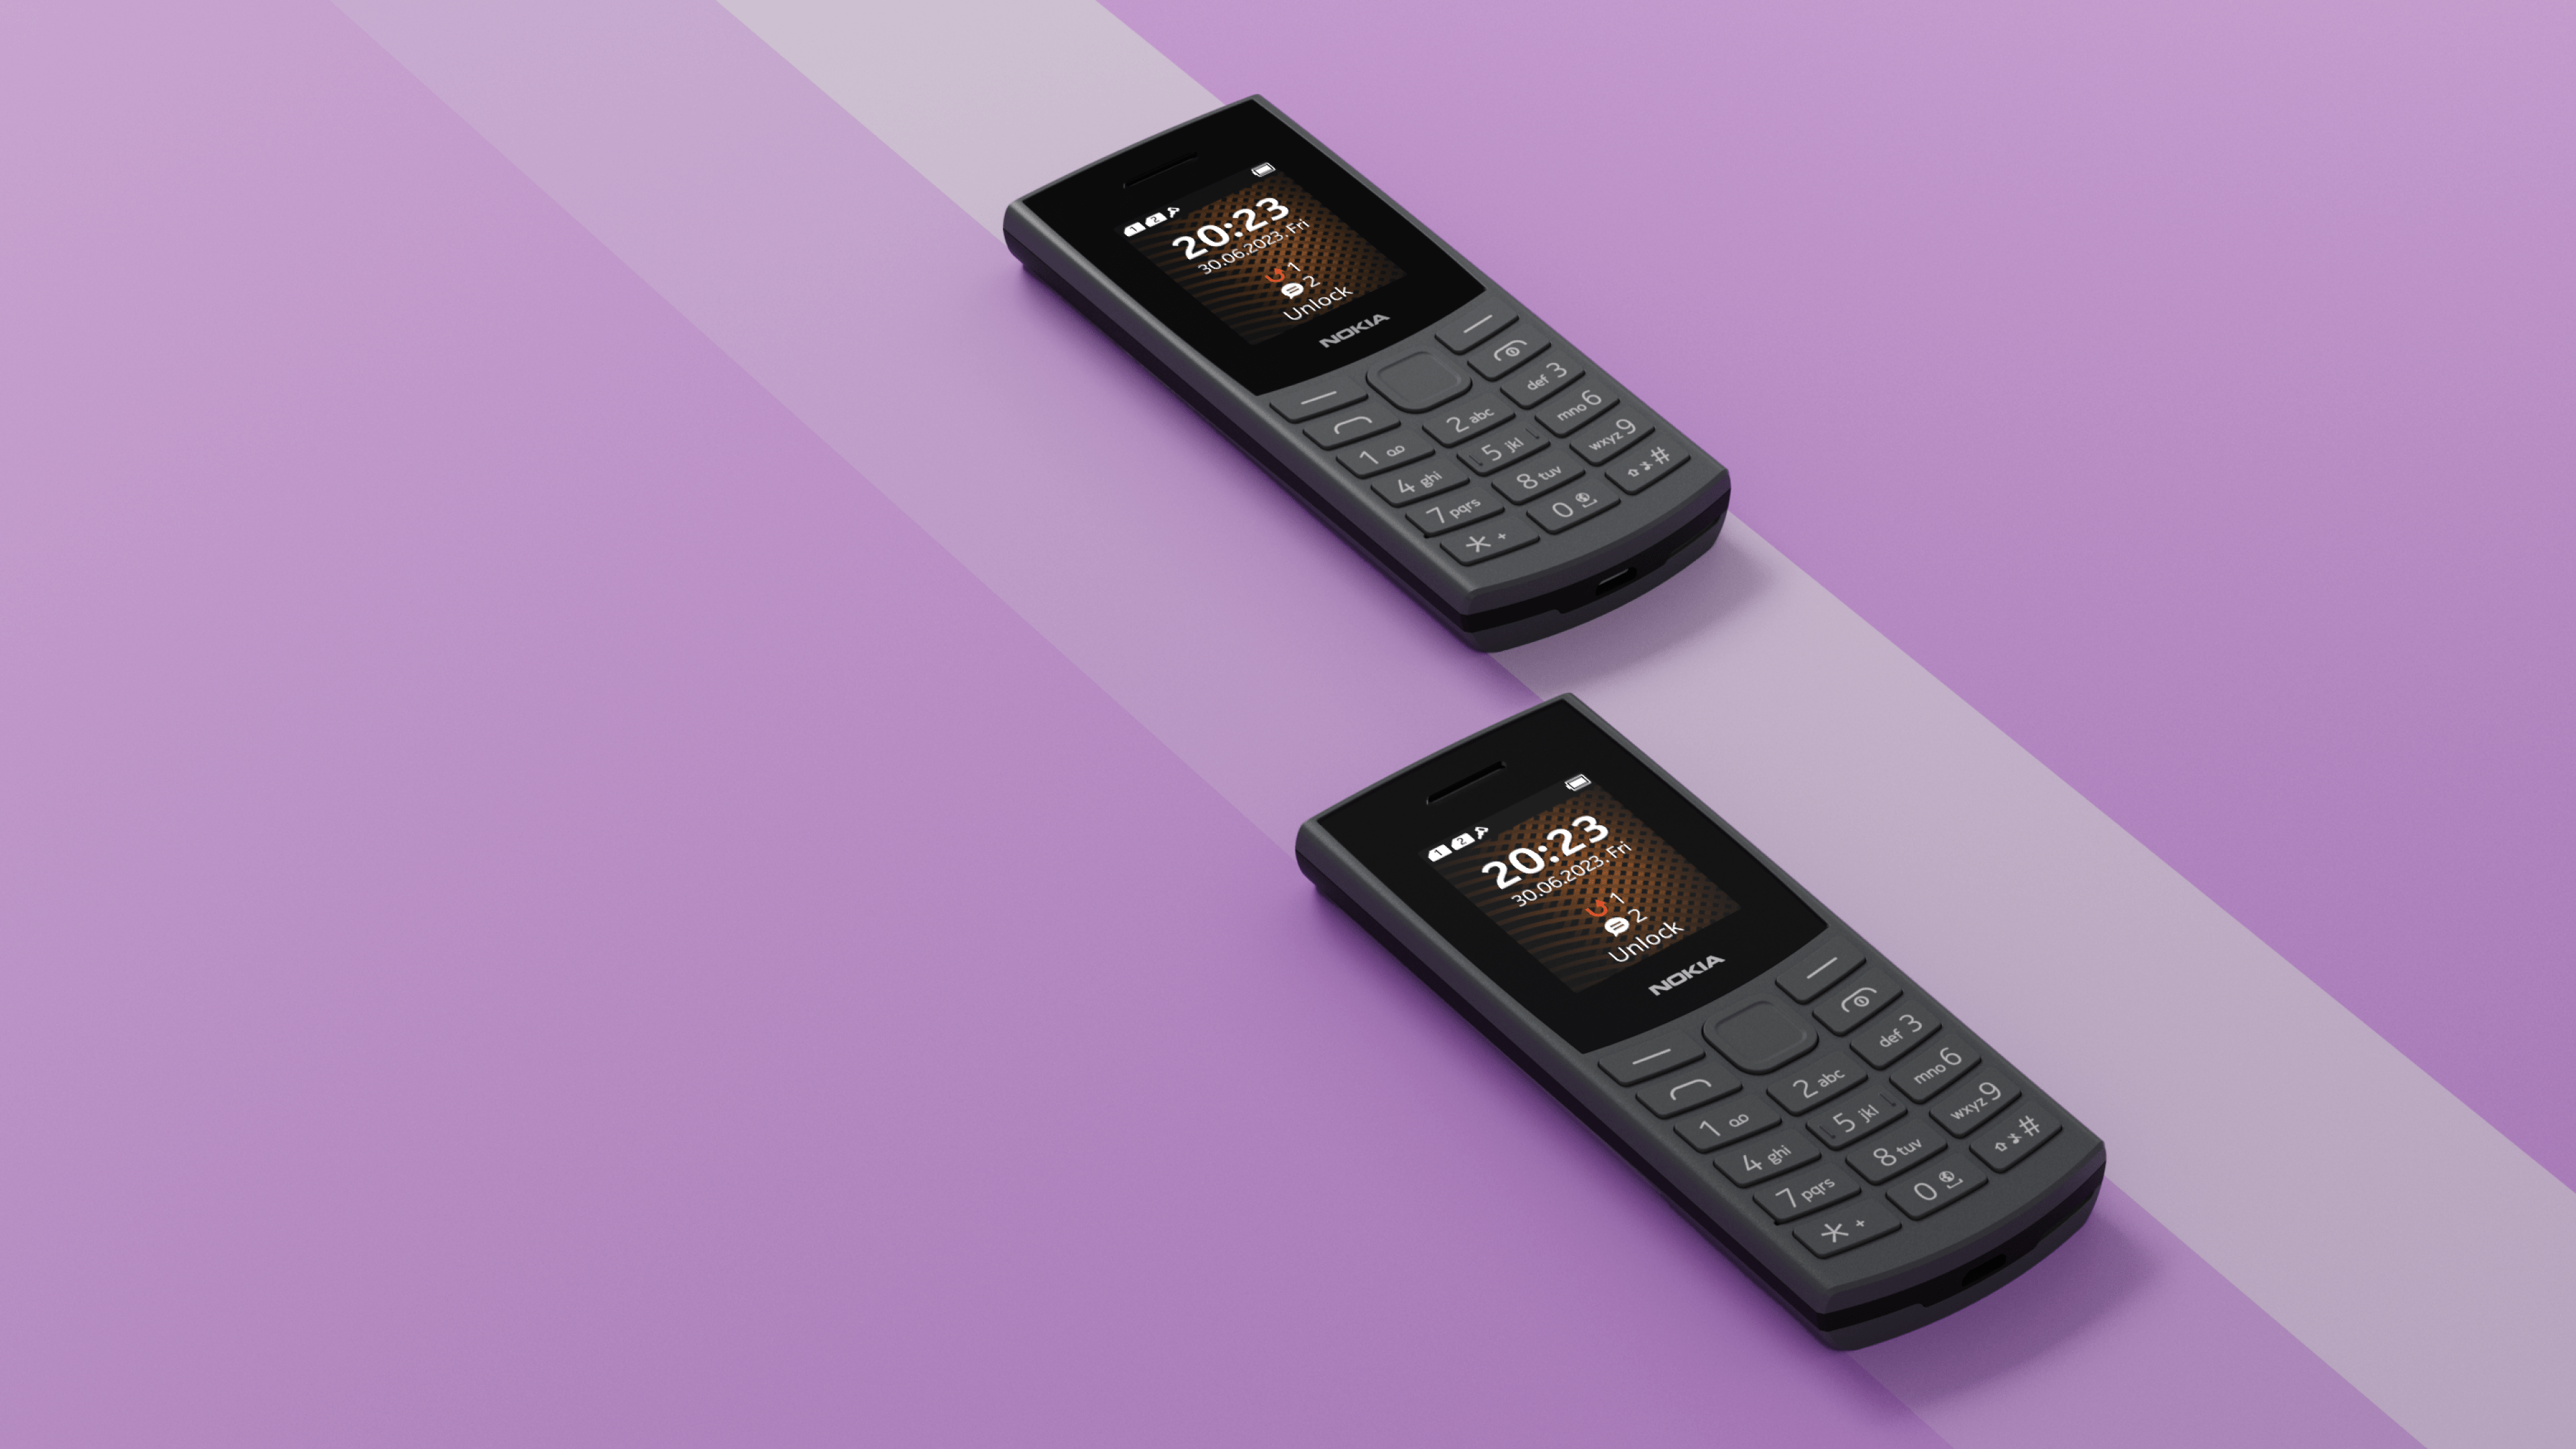 Nokia 105 Classic feature phone with in-built UPI launched in